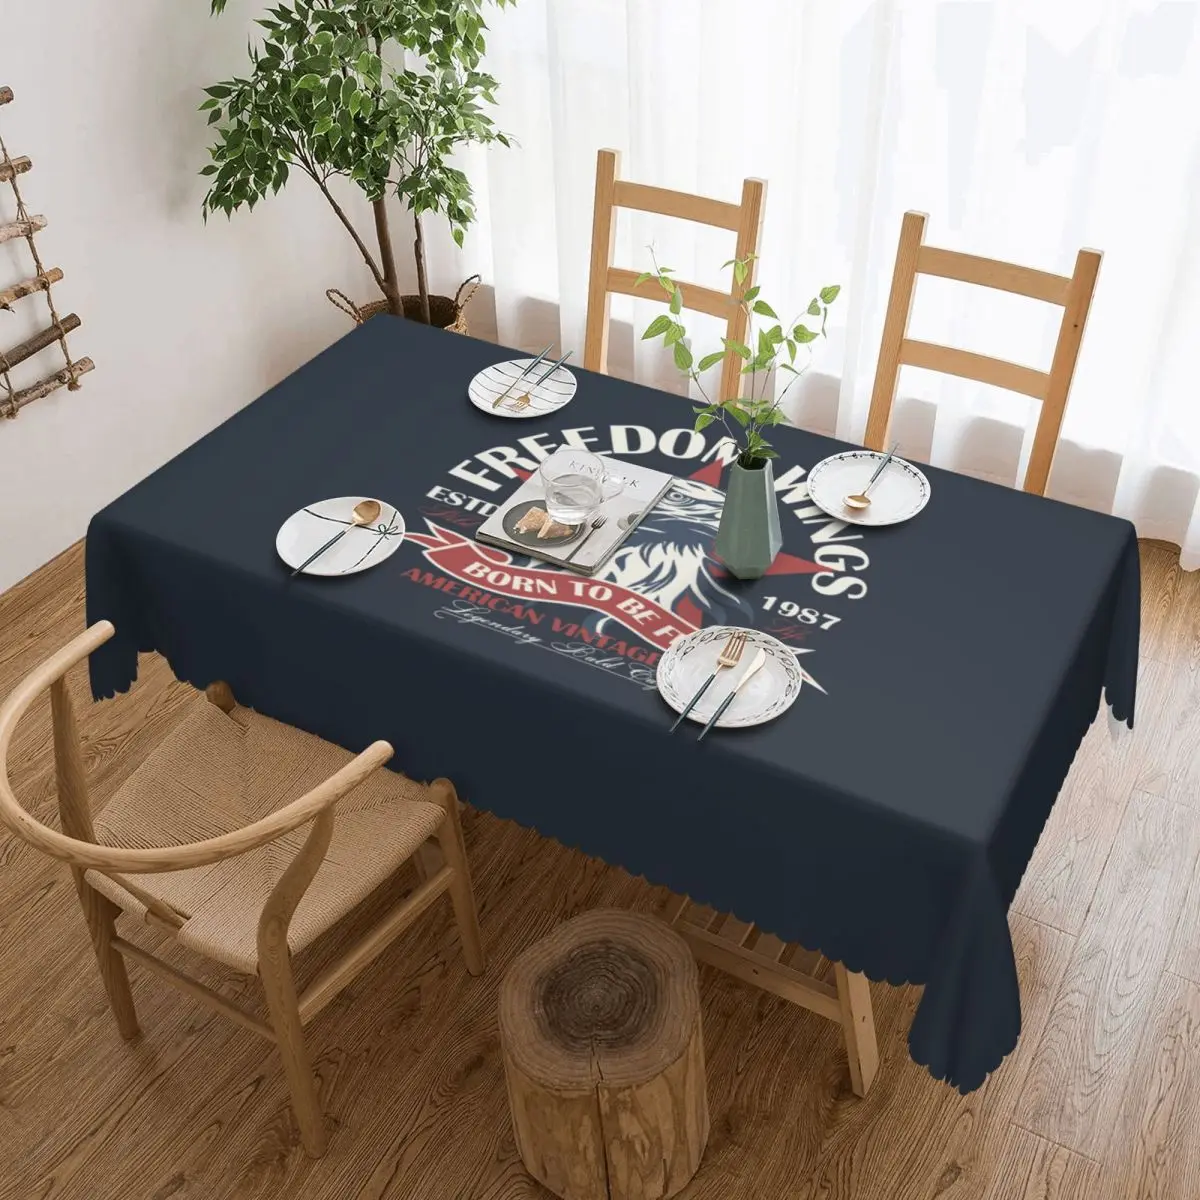 

Rectangular Waterproof American Bald Eagle Table Cover Table Cloth Tablecloth for Dining